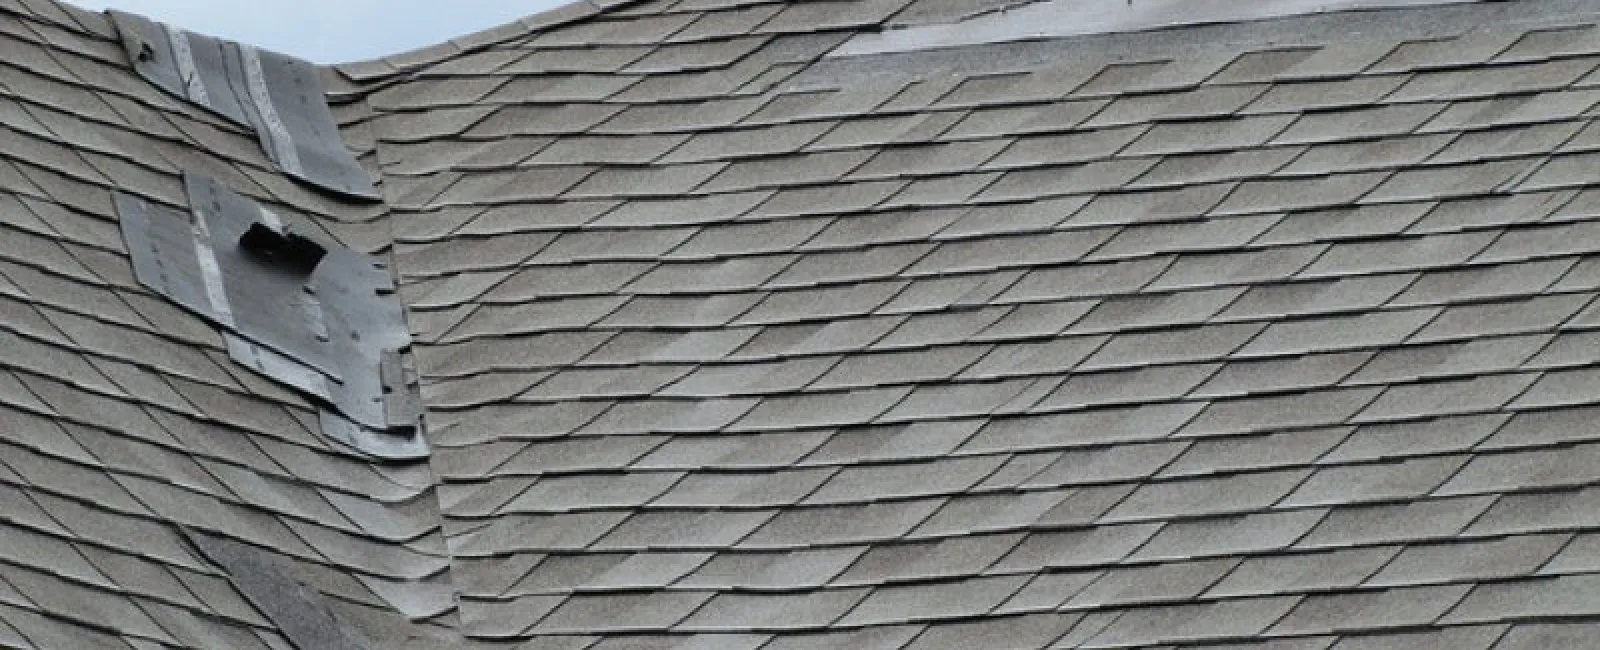 How much roof damage should stop you from buying a home?